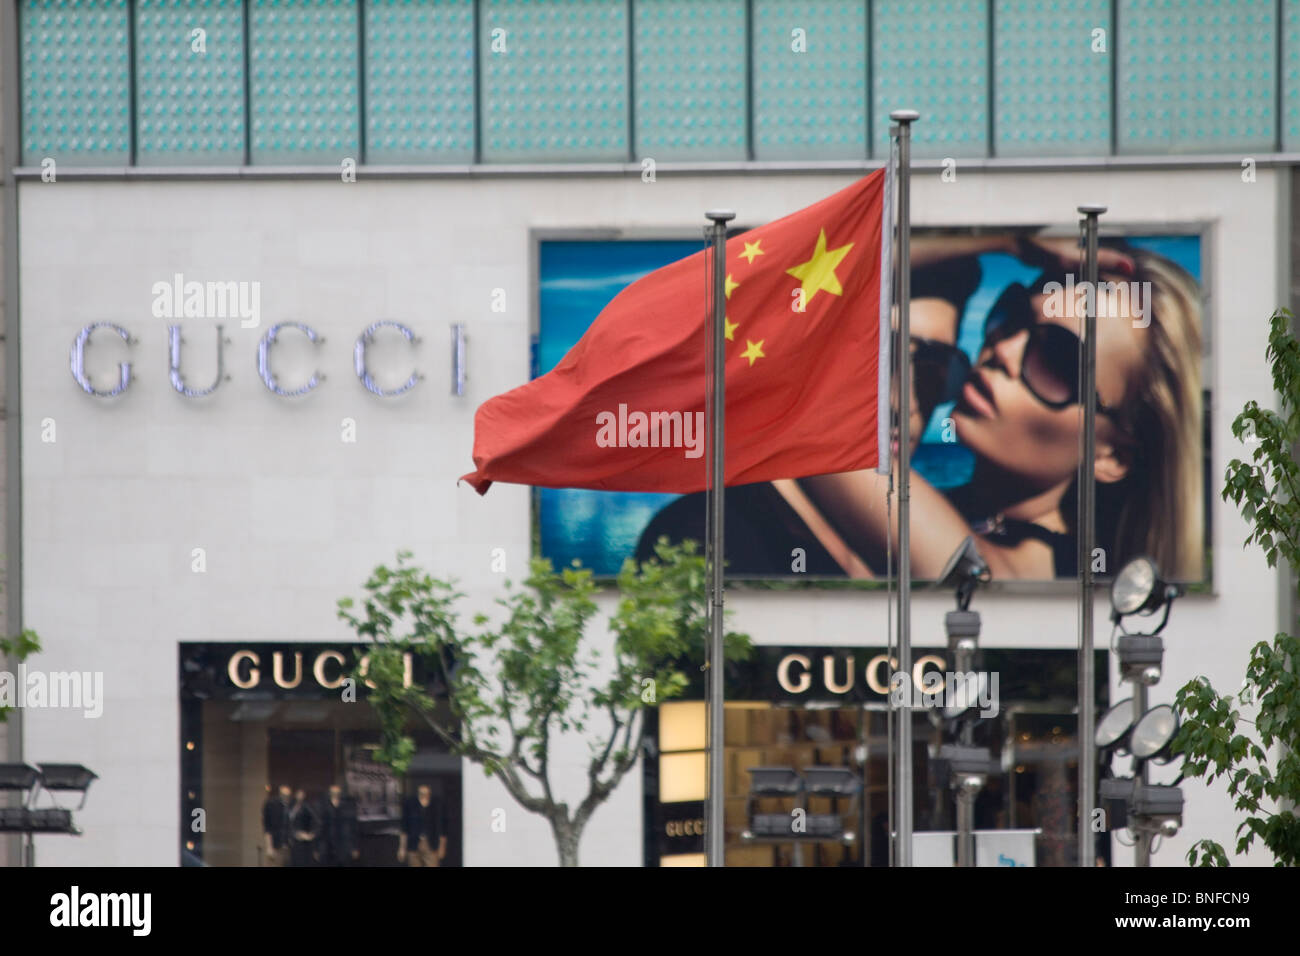 Chinese communist flag flutters in front of Gucci shop, Shanghai, China Stock Photo -